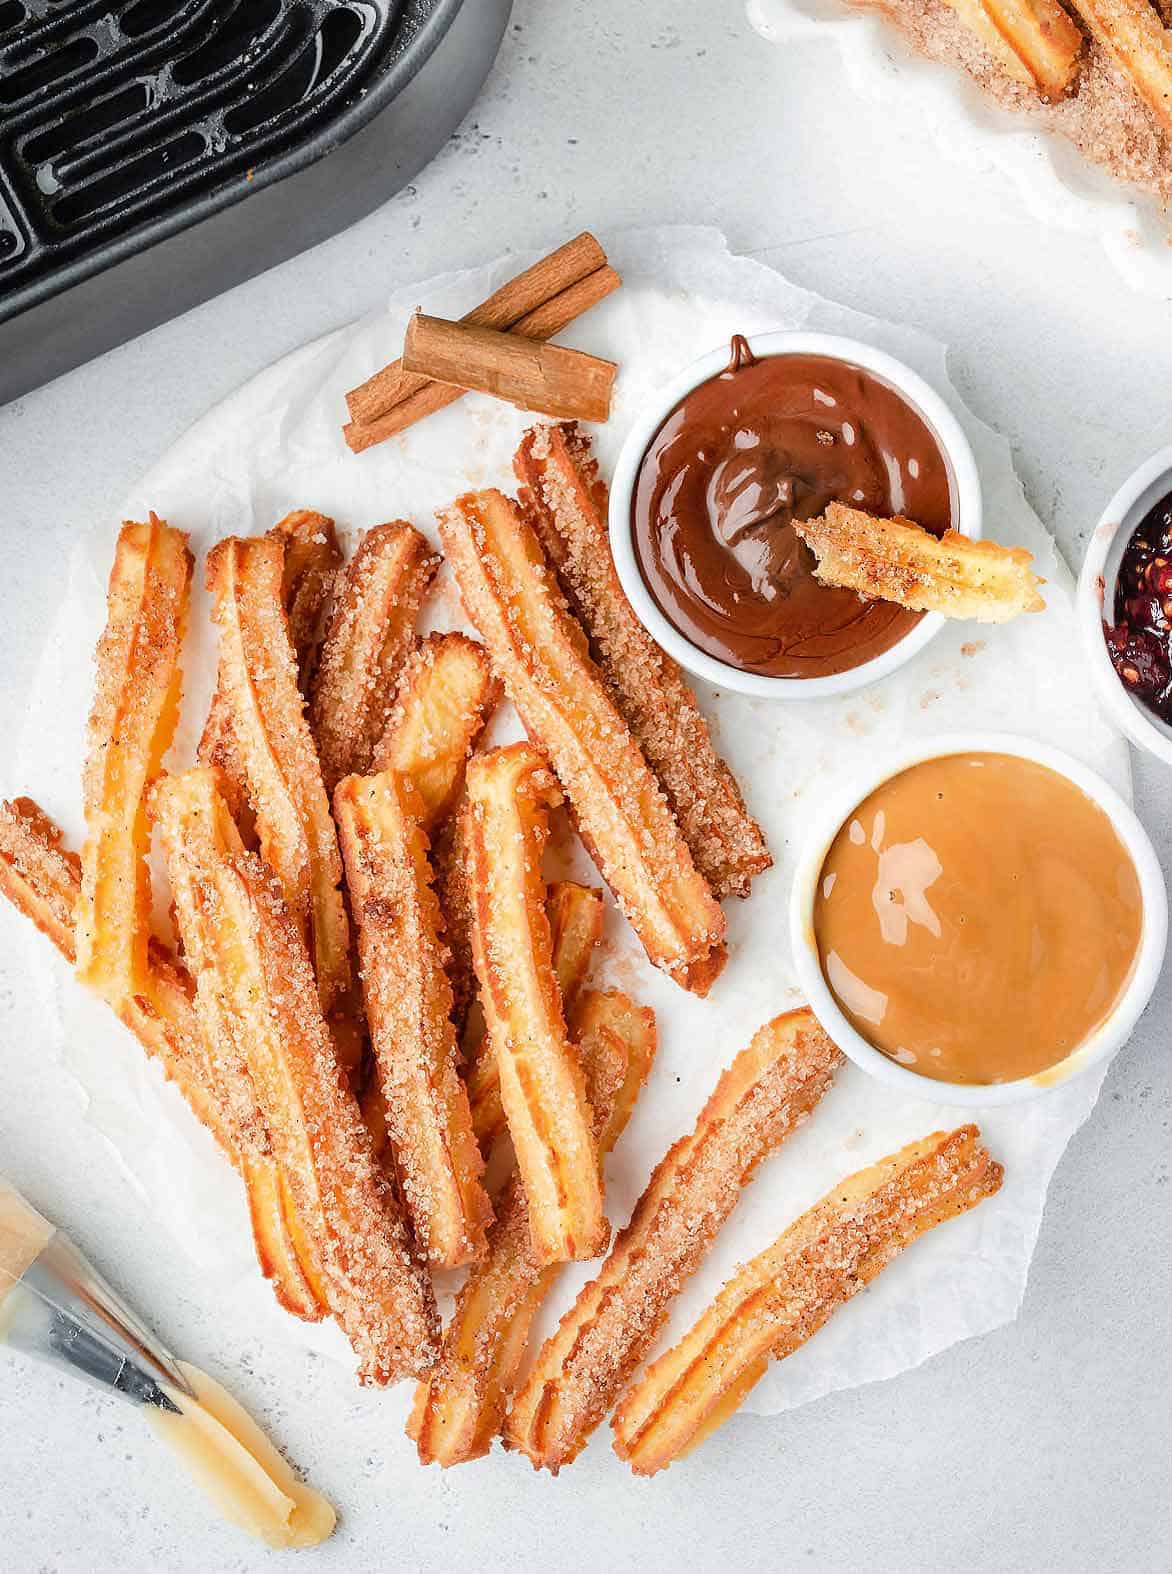 Cinnamon sugar coated churros on a ceramic tray with parchment and two white bowls of nutella and dulce de leche.